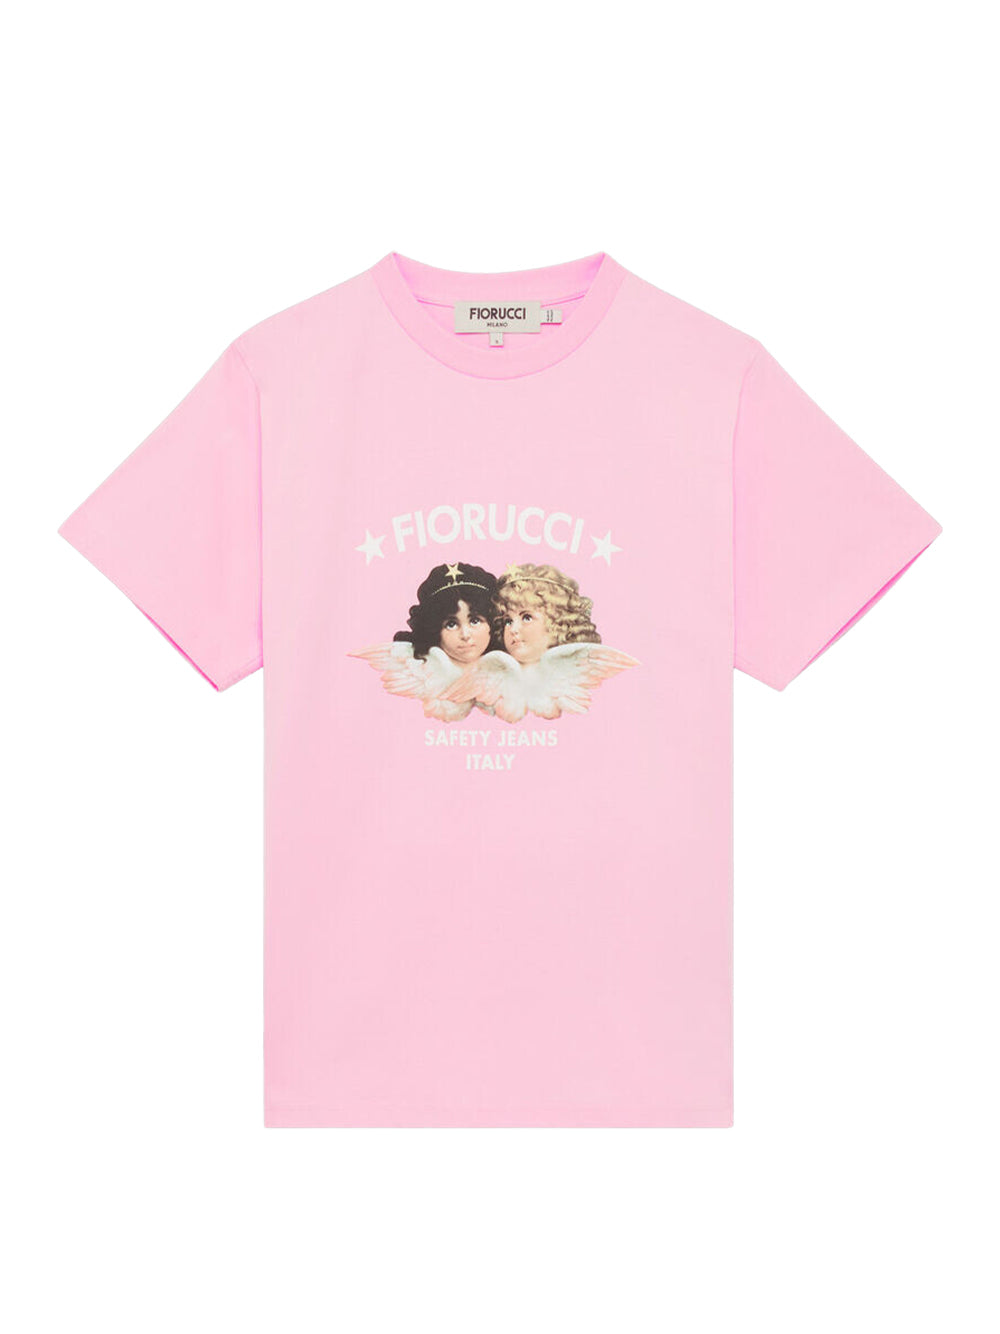 Safety Angels T-Shirt (Pink)